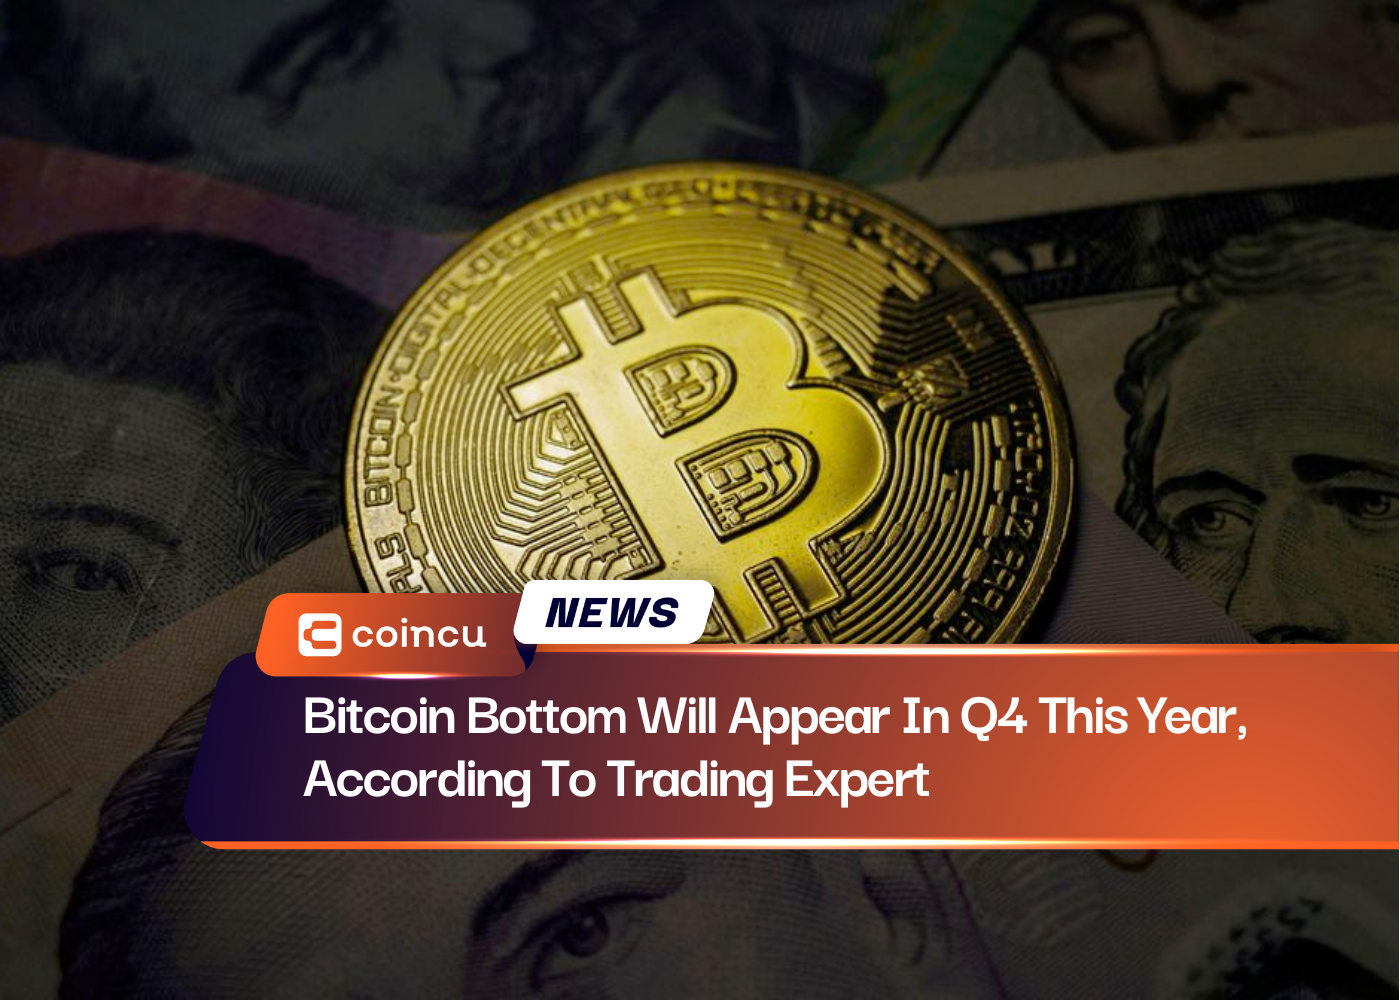 Bitcoin Bottom Will Appear In Q4 This Year, According To Trading Expert